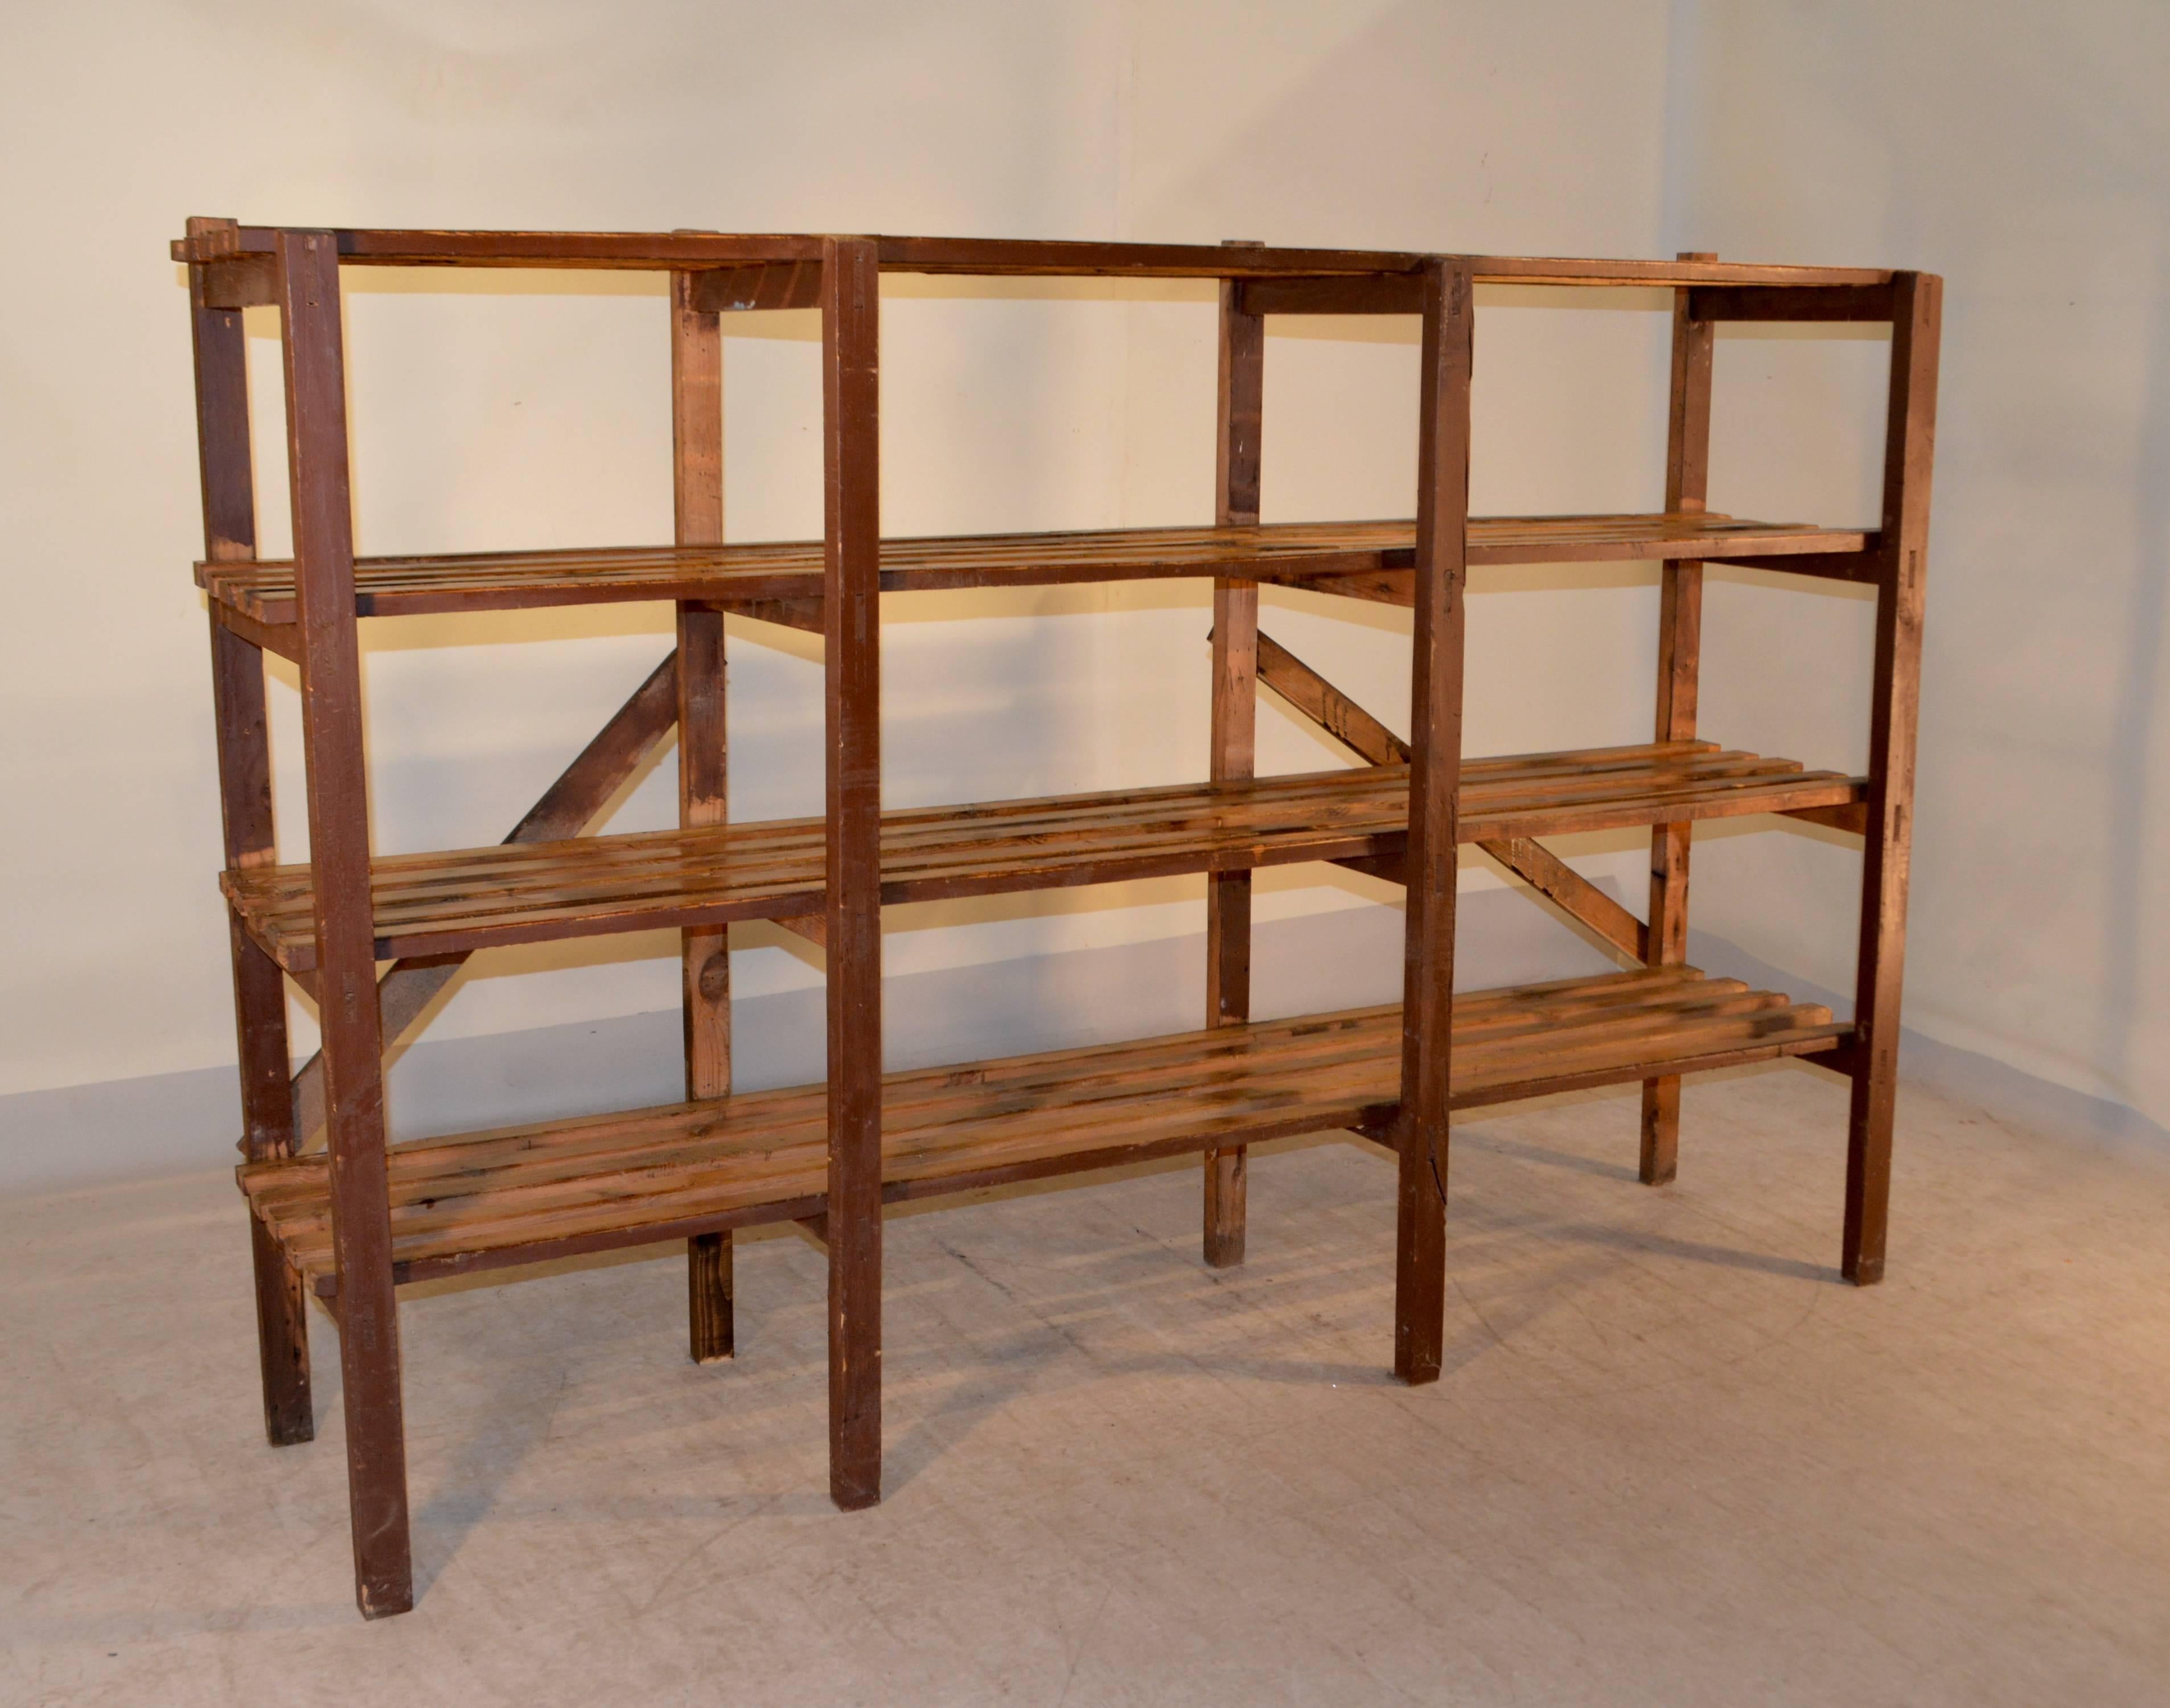 19th century French bakery stand with four slatted shelves, which were optimal for cooling baked goods. The shelves are supported on simple supports and braced by cross braces.